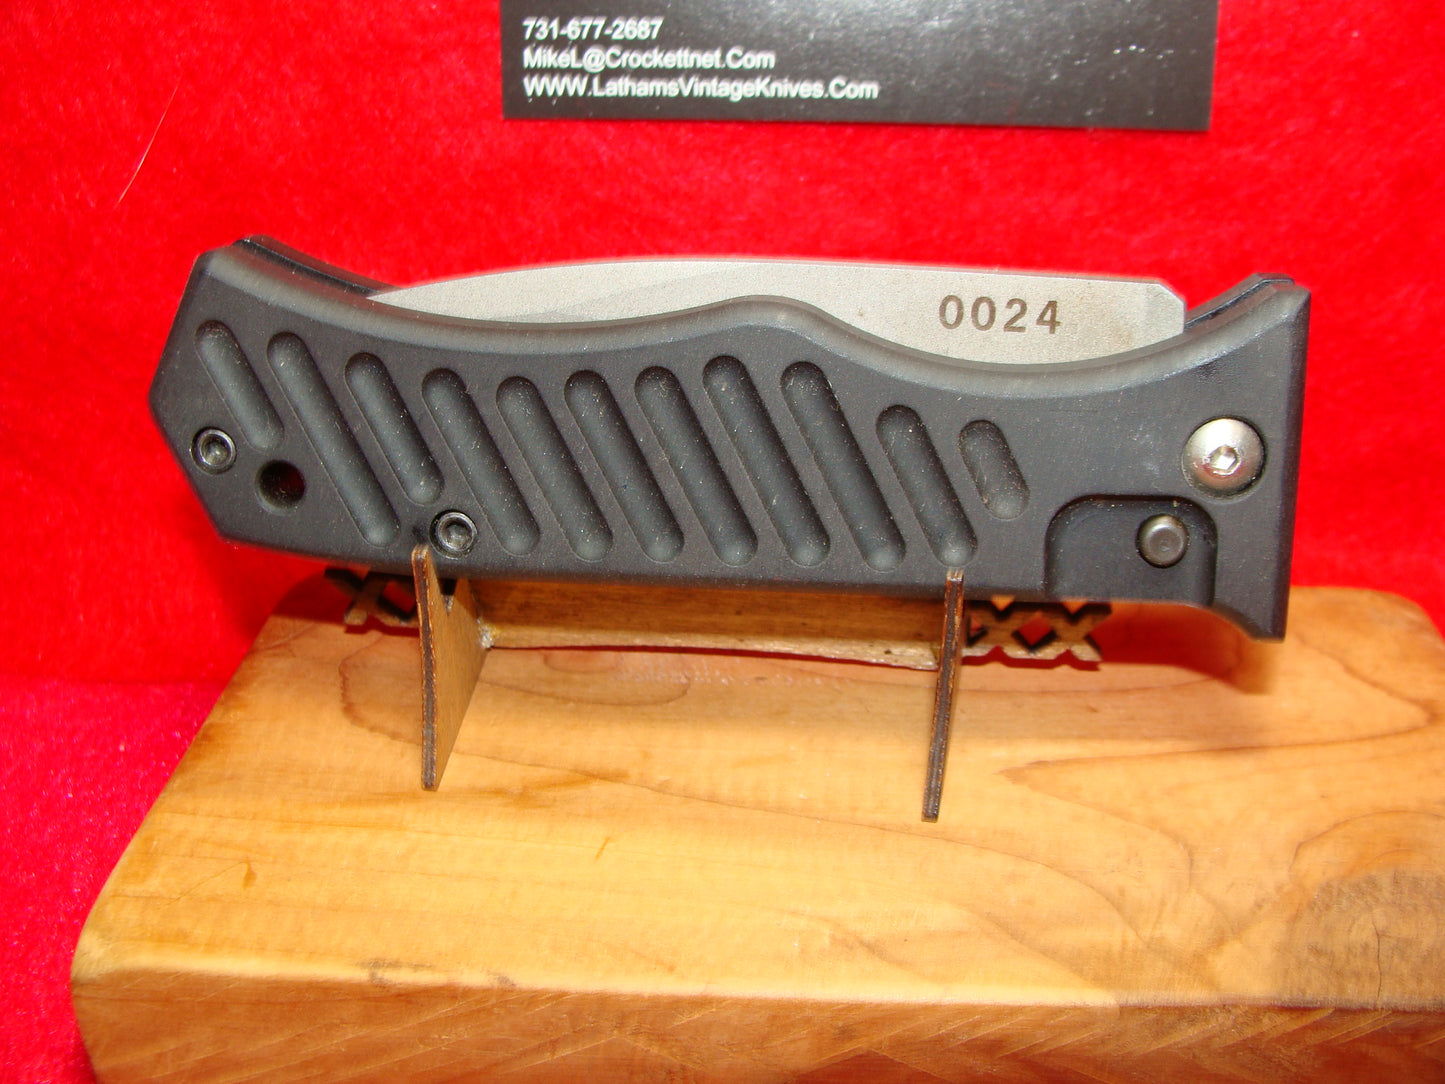 ATS AMERICAN TACTICAL SUPPLY USA 1995-99 TACTICAL AUTOMATIC KNIFE ALL METAL BLACK HANDLES